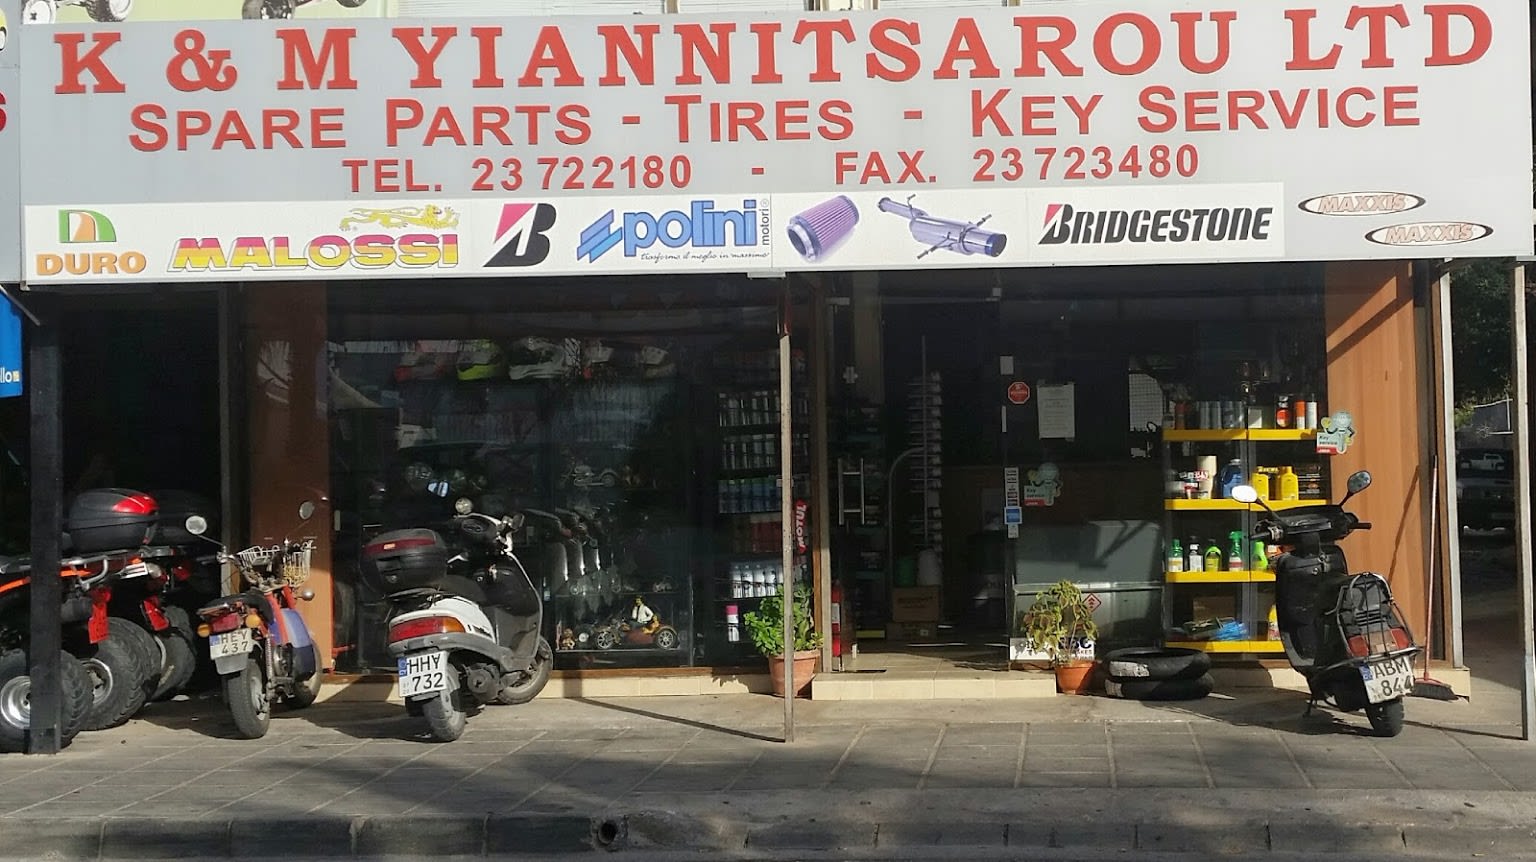 K & M Yiannitsarou Accessories LTD - General Tire Services